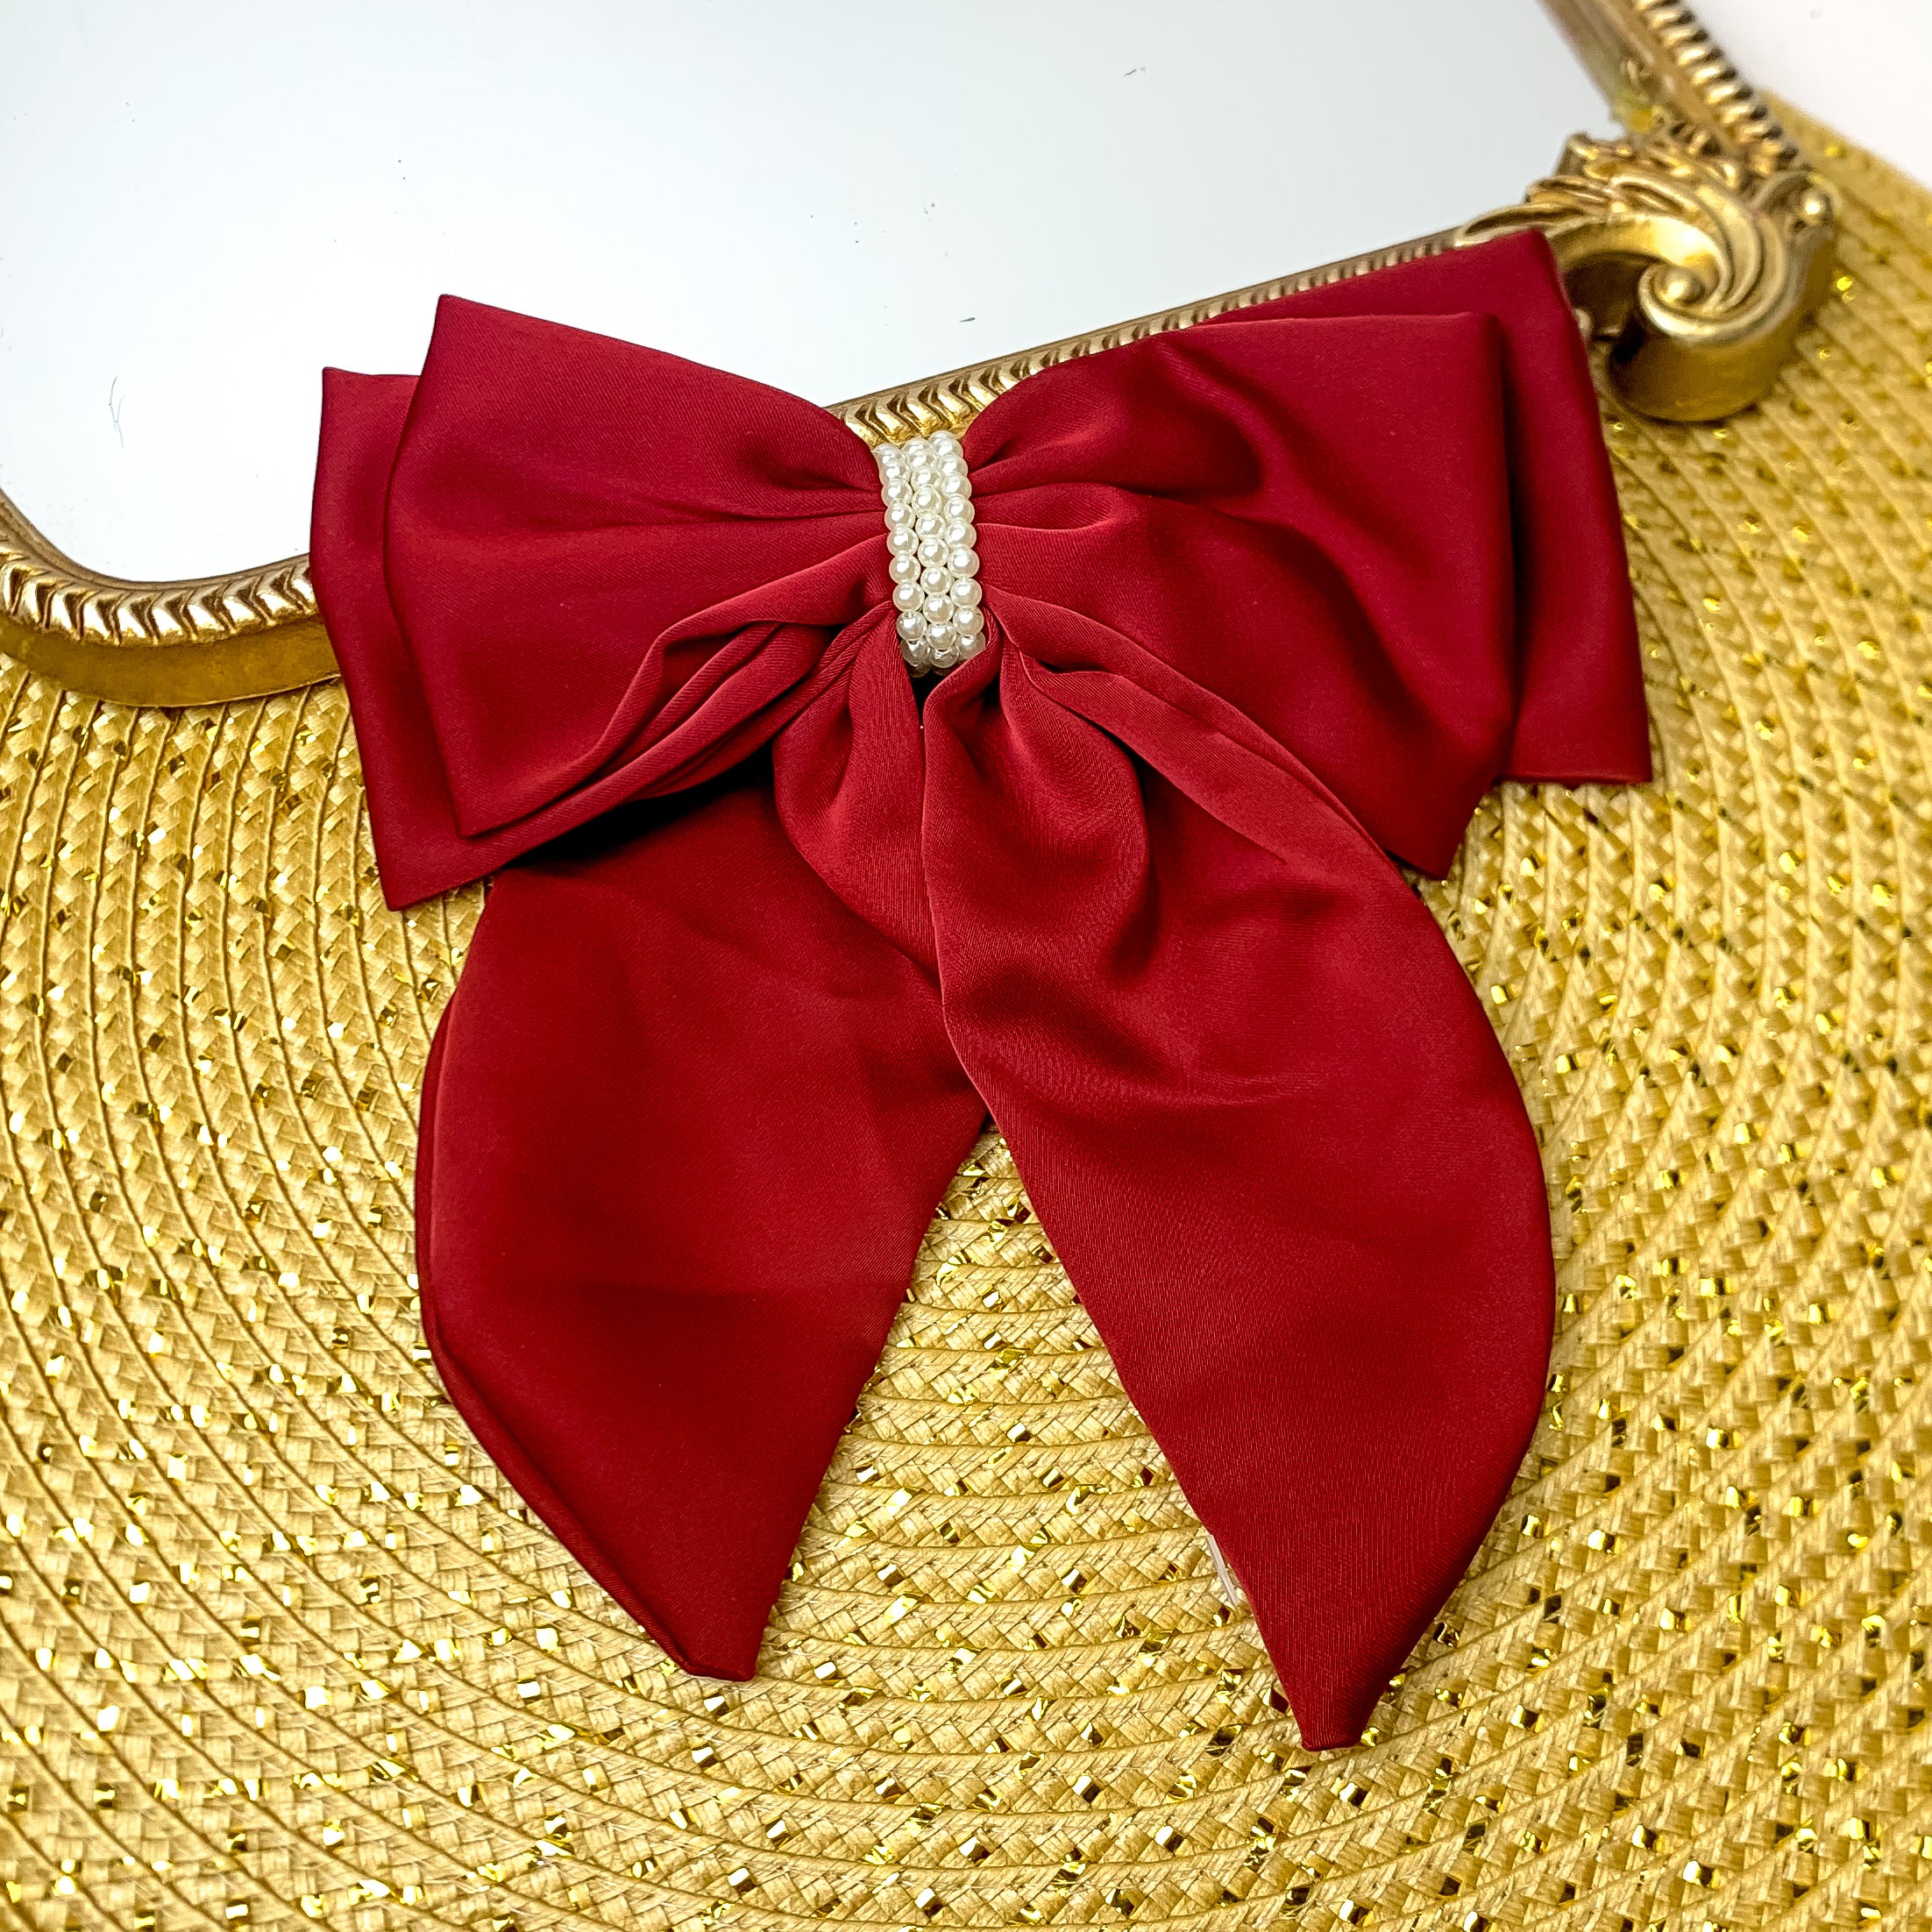 This layered burgundy bow with a pearl canter is laid against a gold mirror and has a gold background.